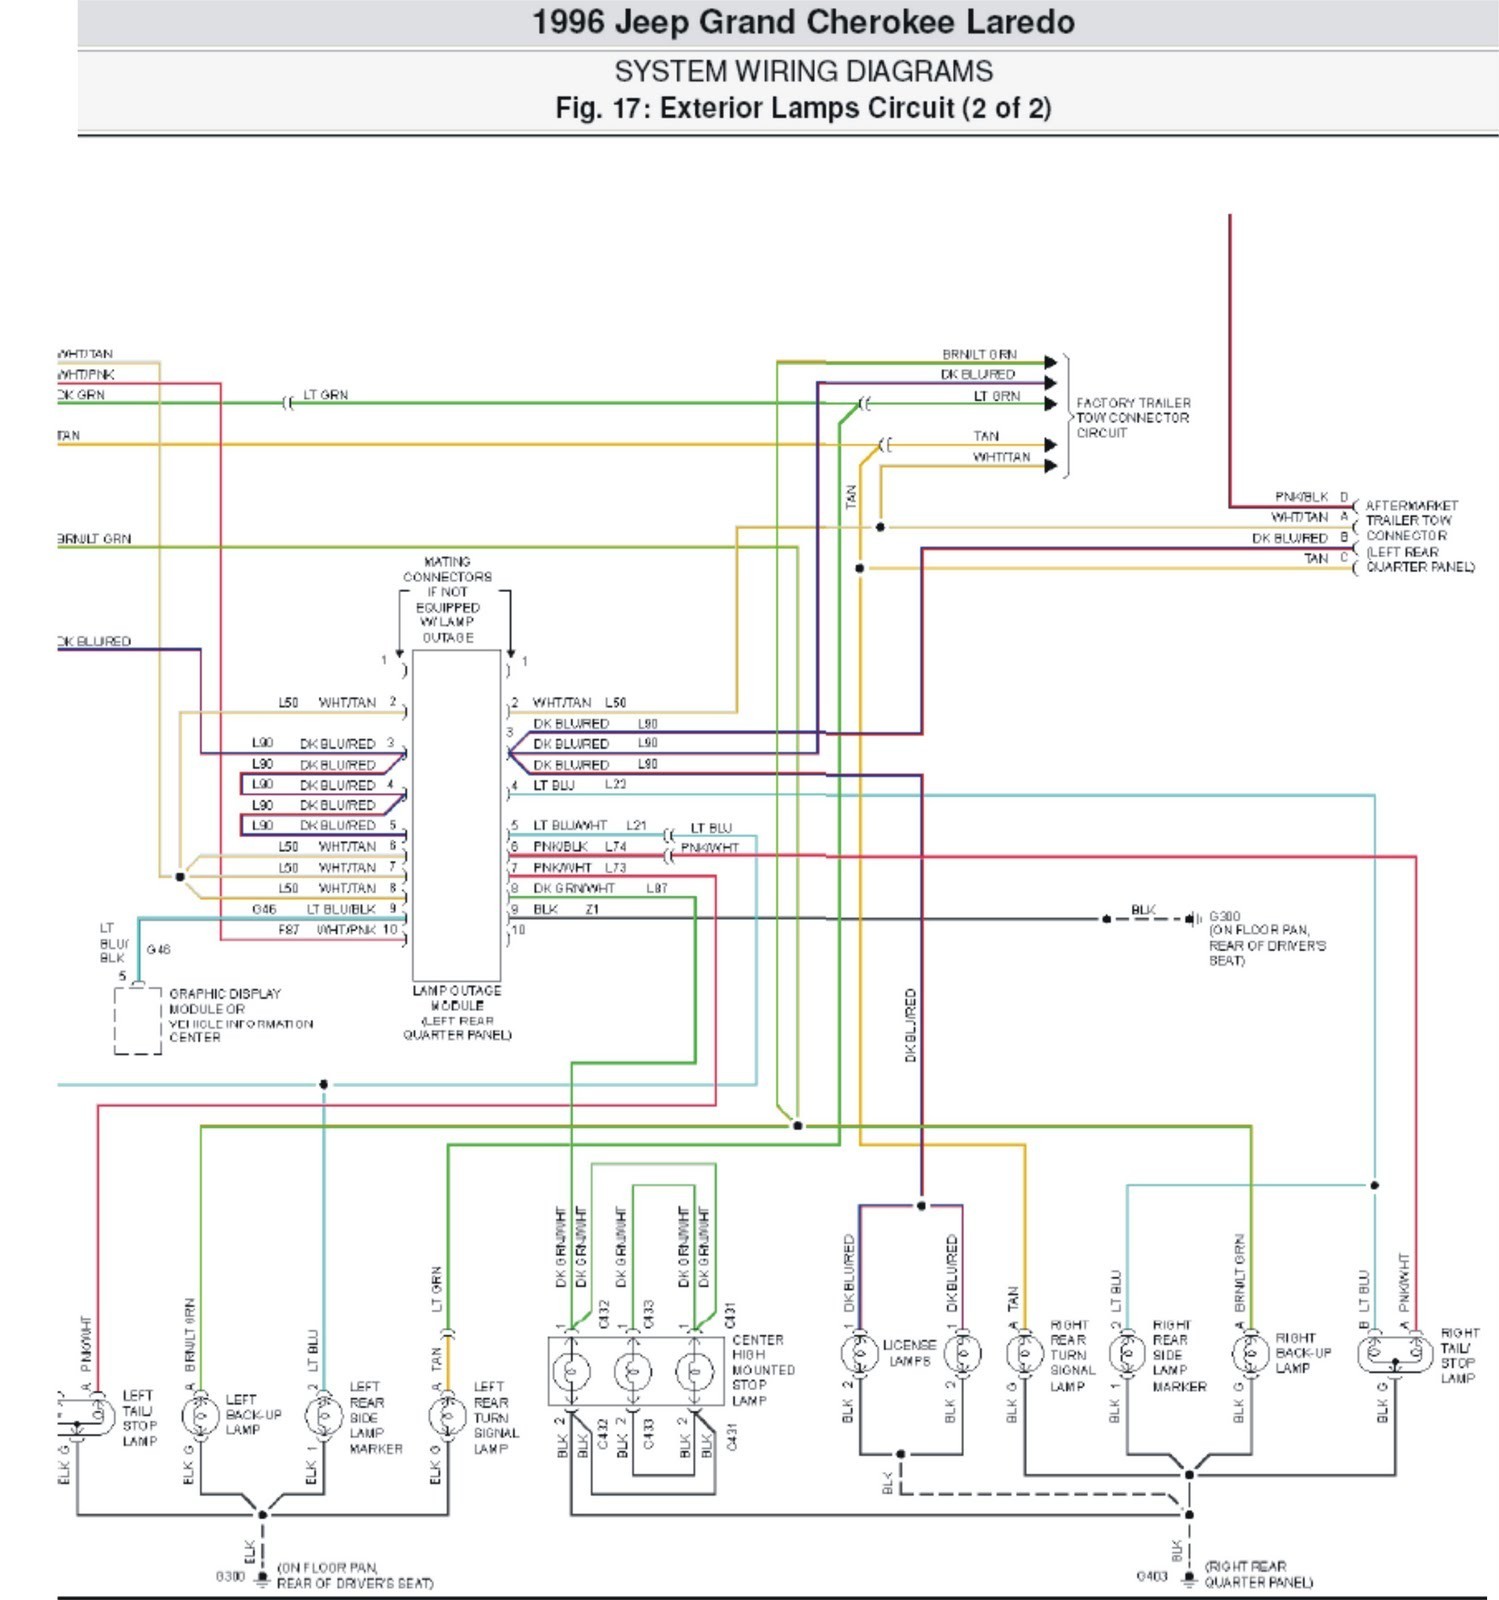 C13 and C14 Wiring Diagrams Lv 3109] K20 Engine Wiring Diagram Of C13 and C14 Wiring Diagrams